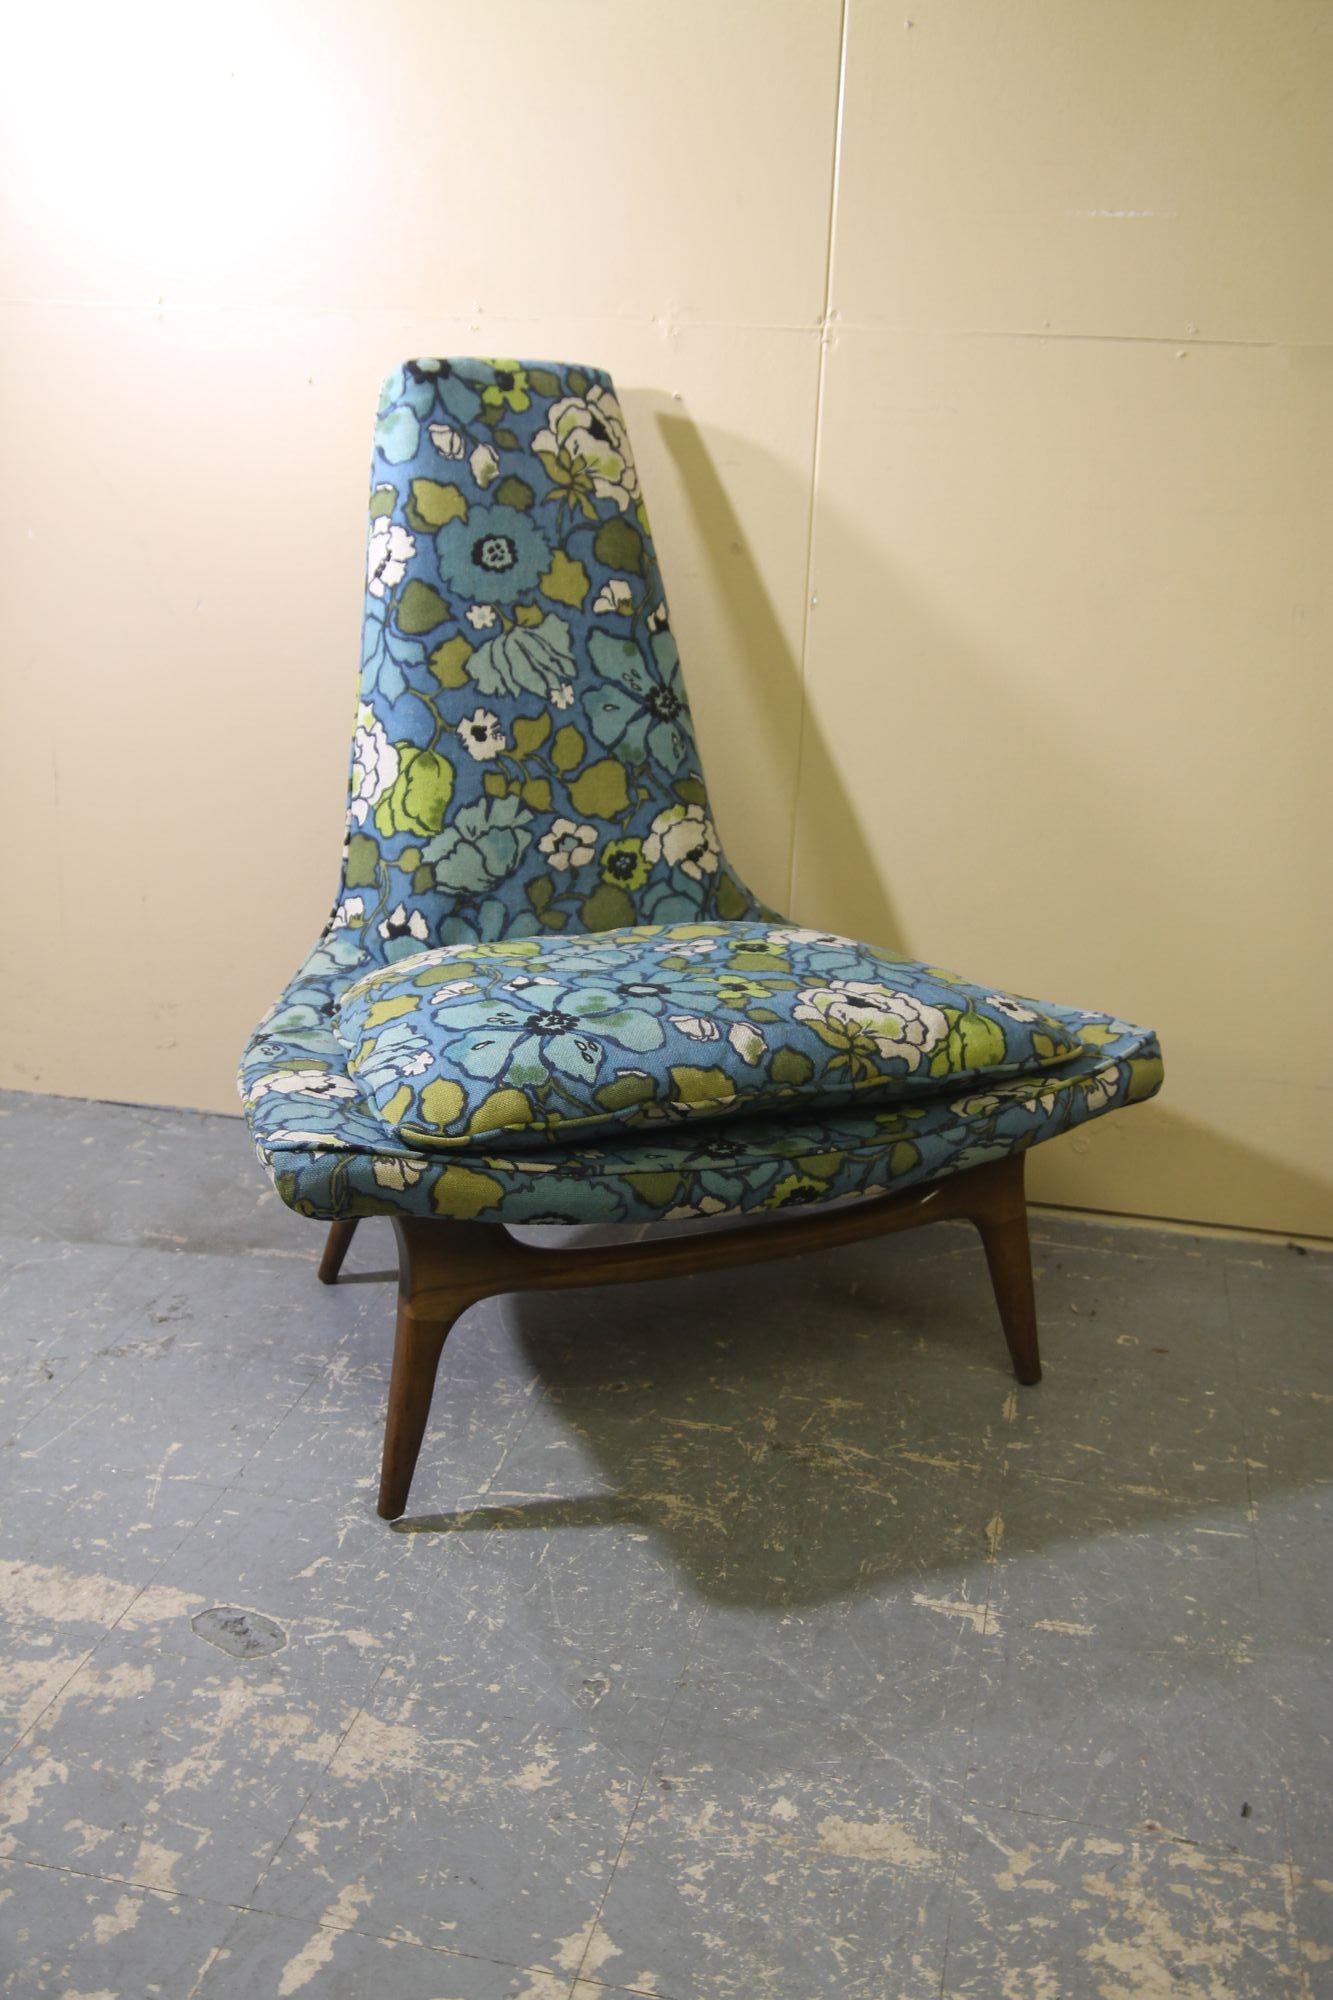 Pleased to offer this great chair from Karpen of California. This 1960s iconic chair retains its original fabric that is in great condition. The fabric design looks similar to Jack Larsen fabric. This chair is in great vintage condition.